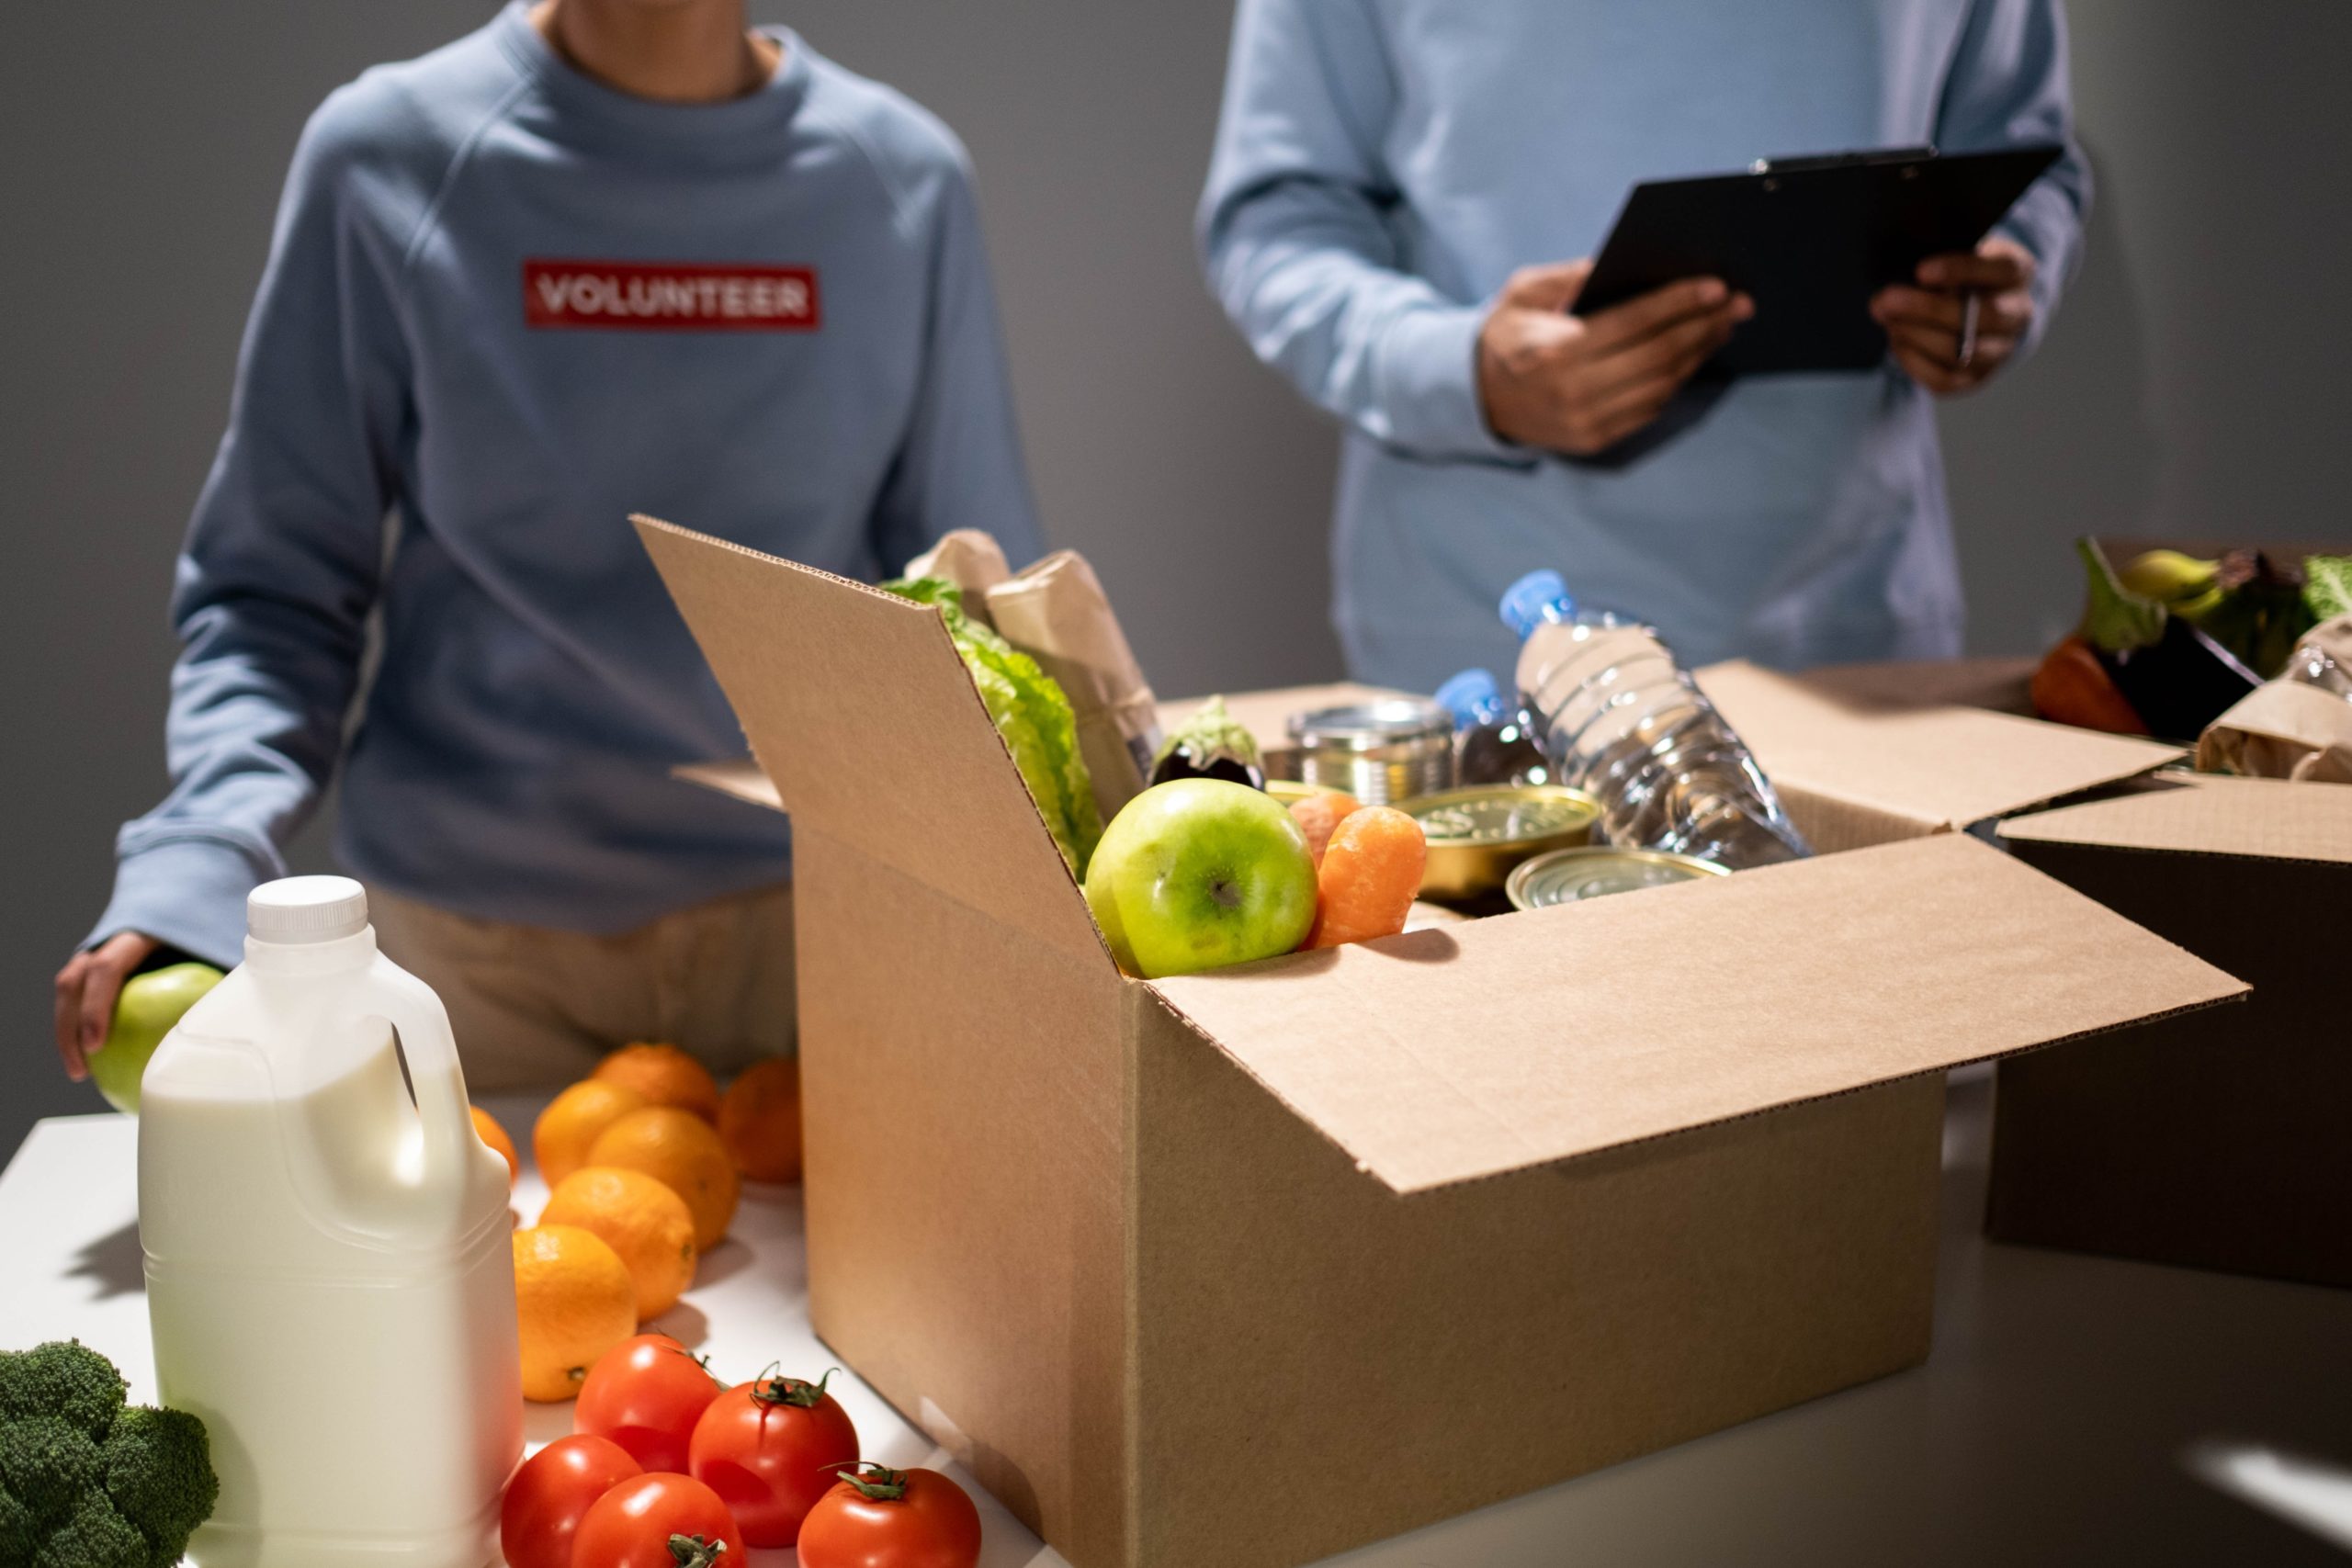 Food charity drive with volunteers collecting groceries in a box